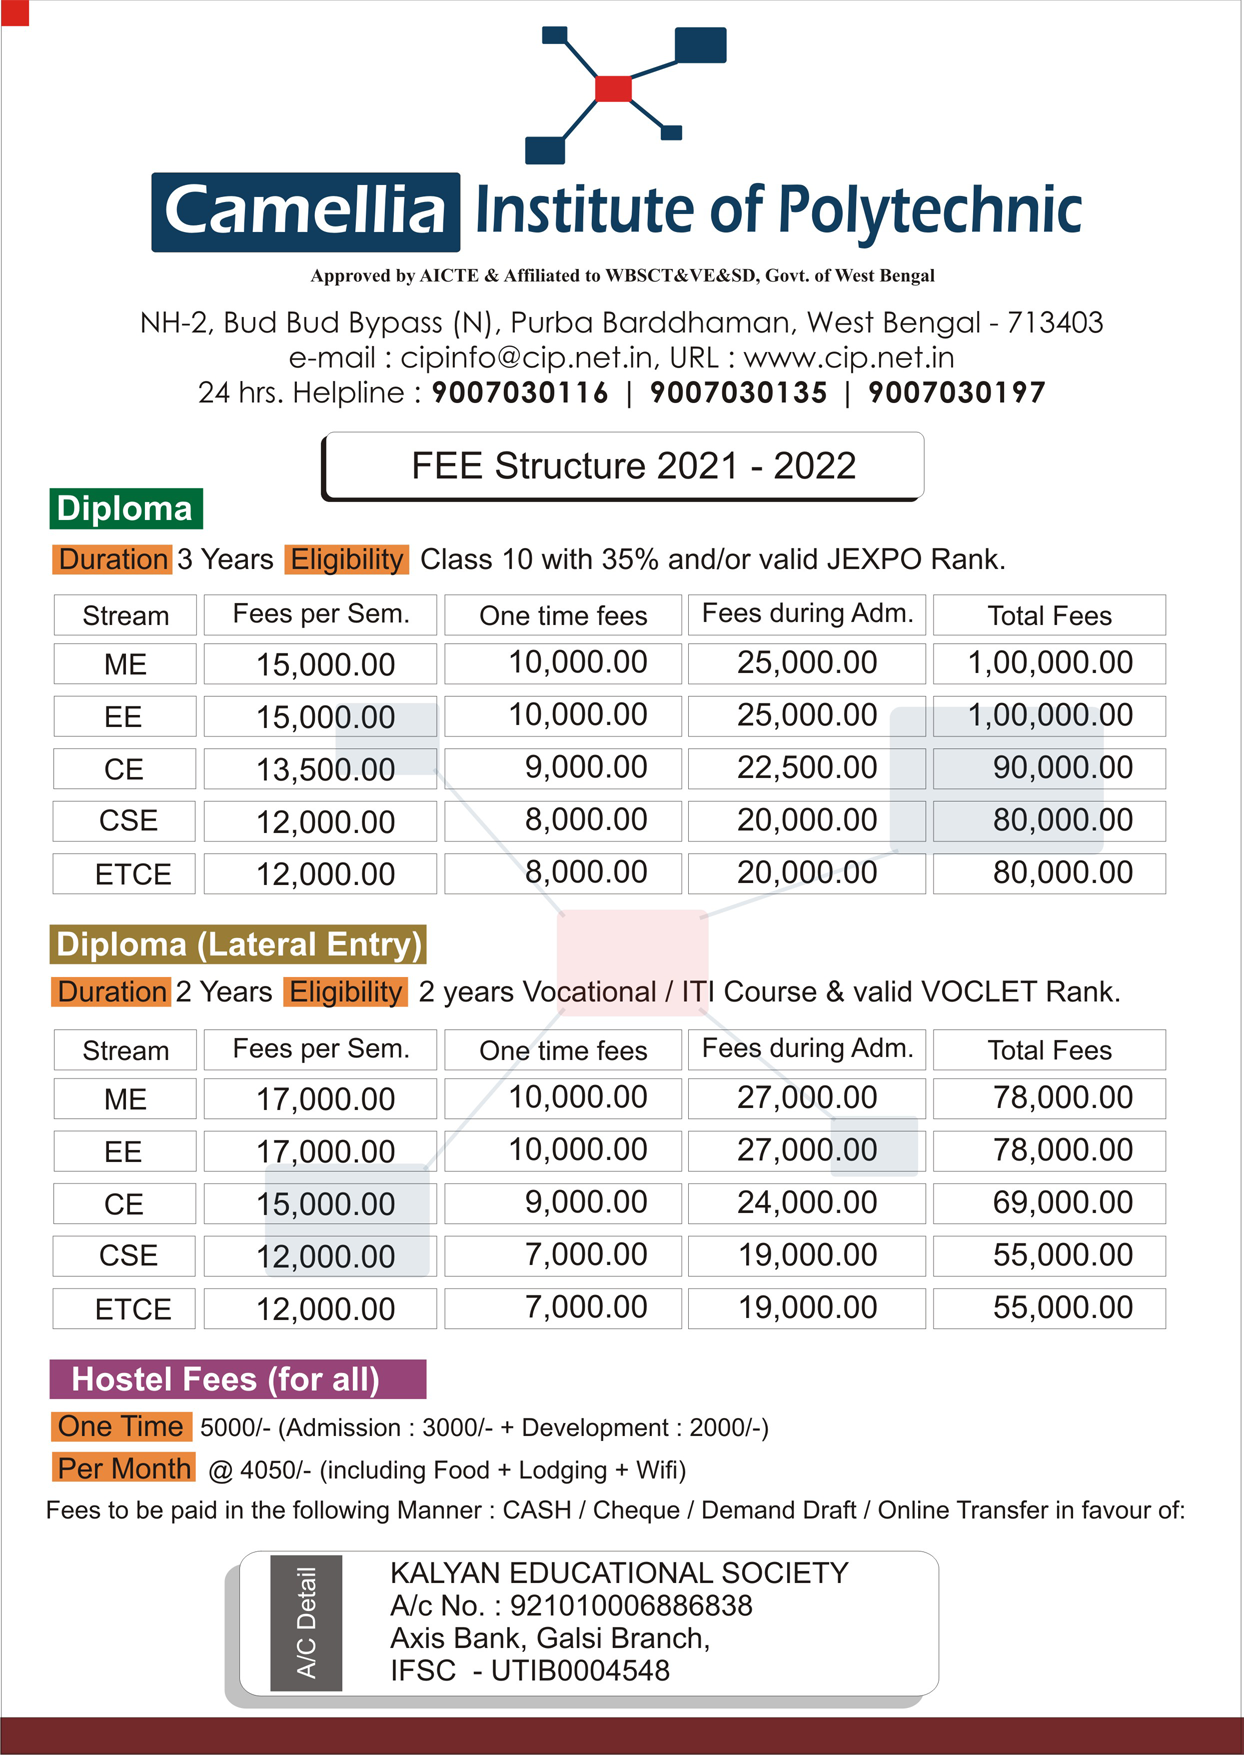 Fee structure for 20232024 Camellia Institute of Polytechnic